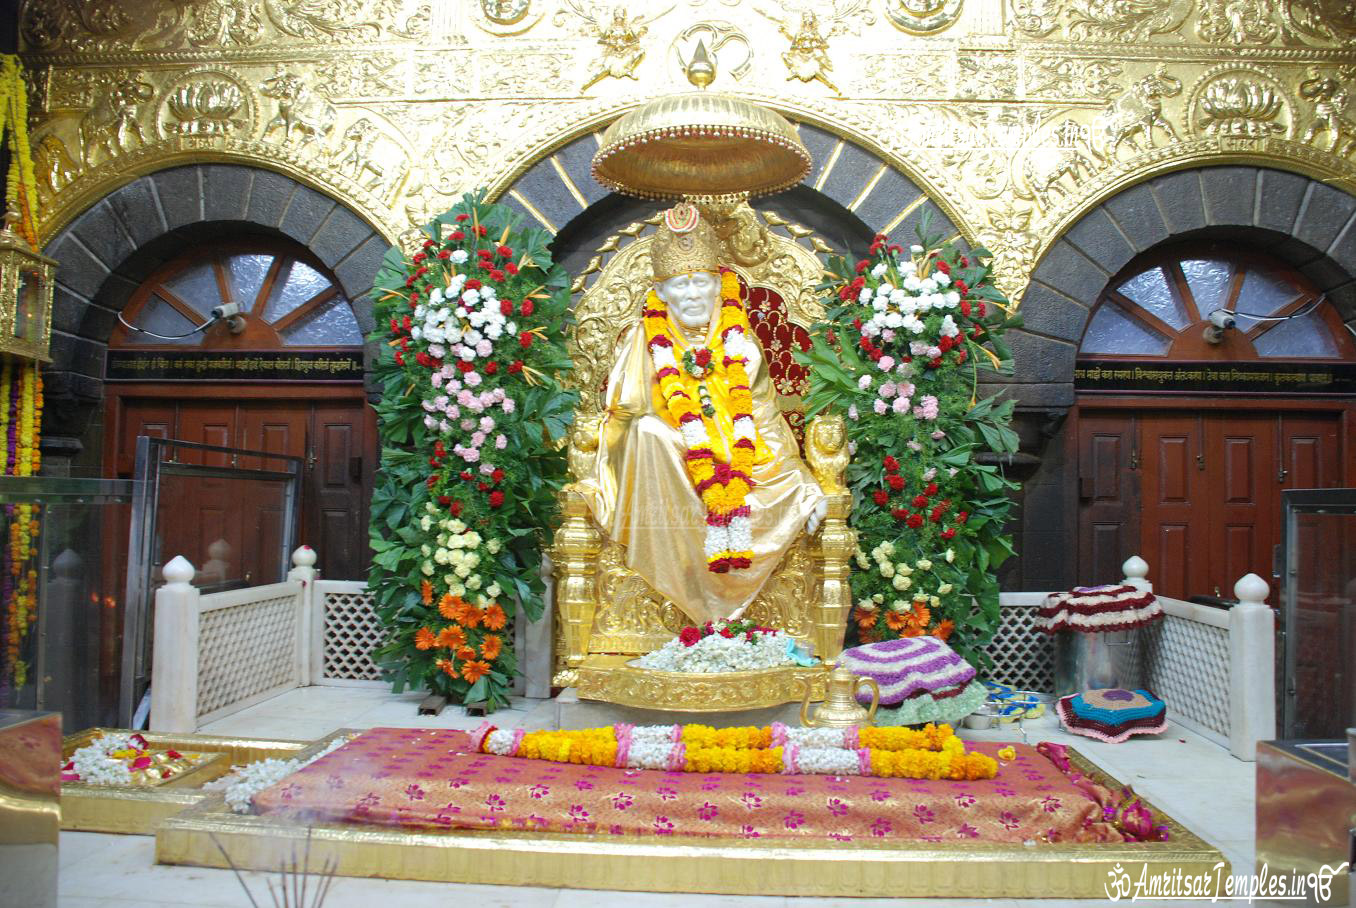 Shirdi Sai Baba HD pictures, wallpapers, photos, images Downloads -  Religious Wallpaper, Hindu God Pictures, Free HD Hindu God Images Download,  Indian God Photos, Goddesses , Gurdwara, Temples in India, Historical  Places,